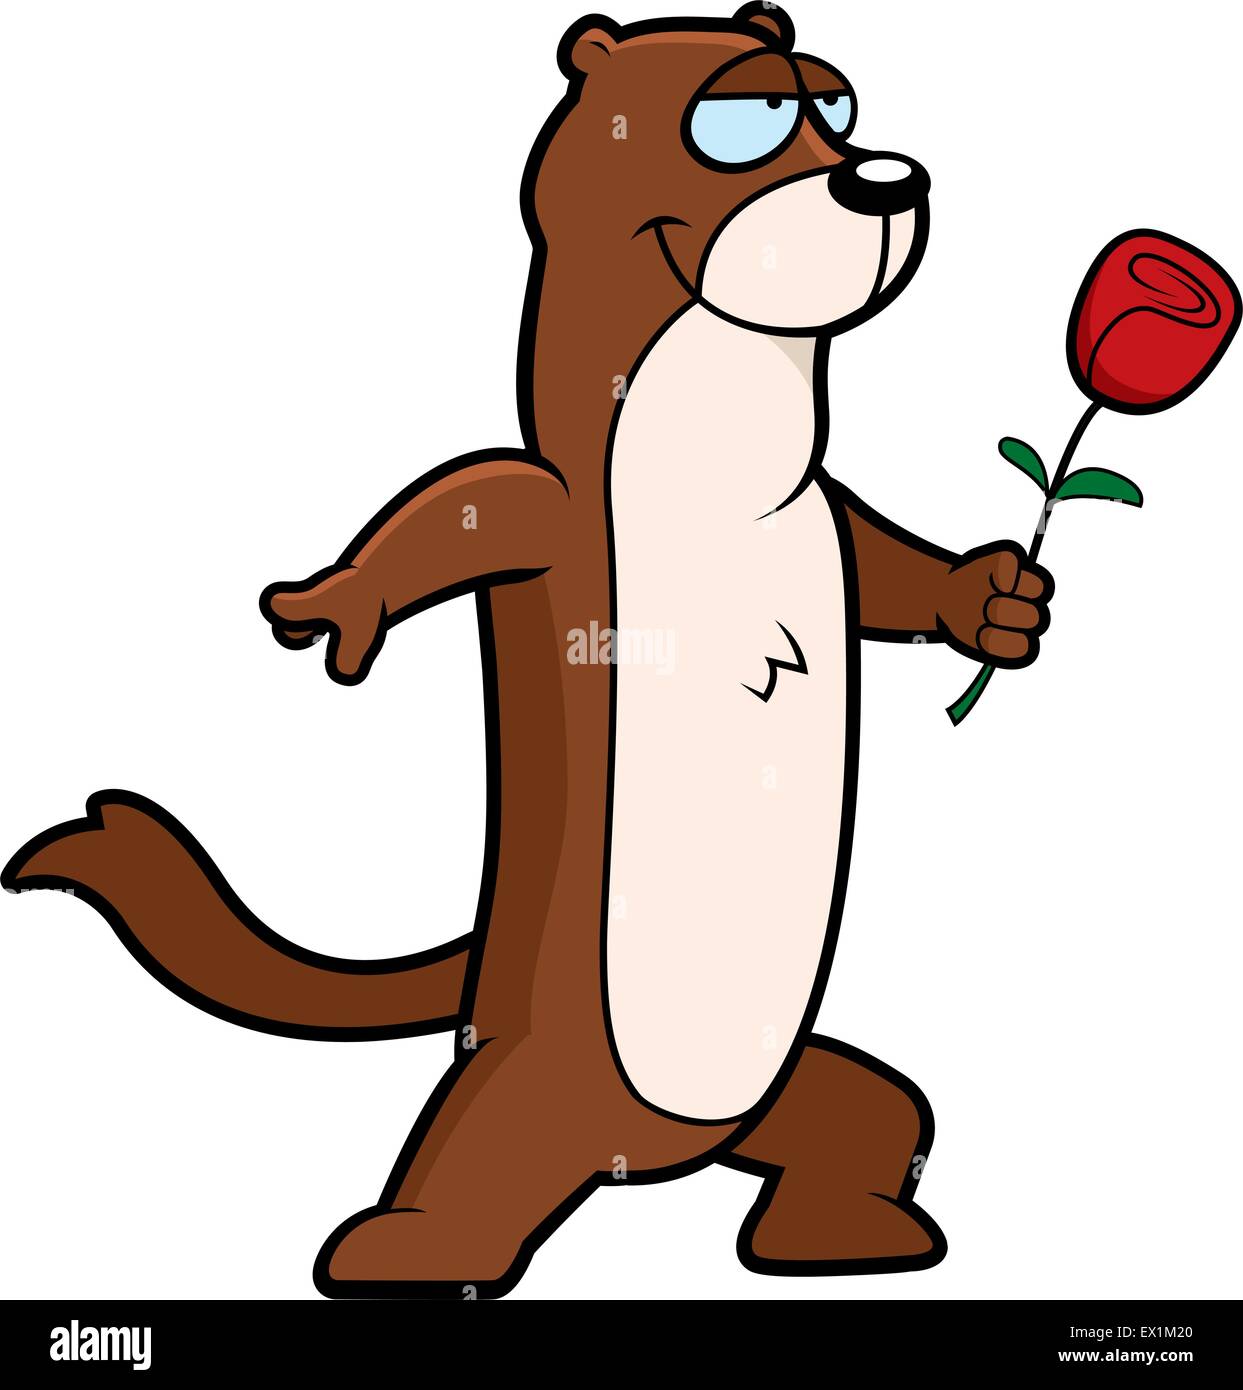 A happy cartoon weasel with a flower. Stock Vector